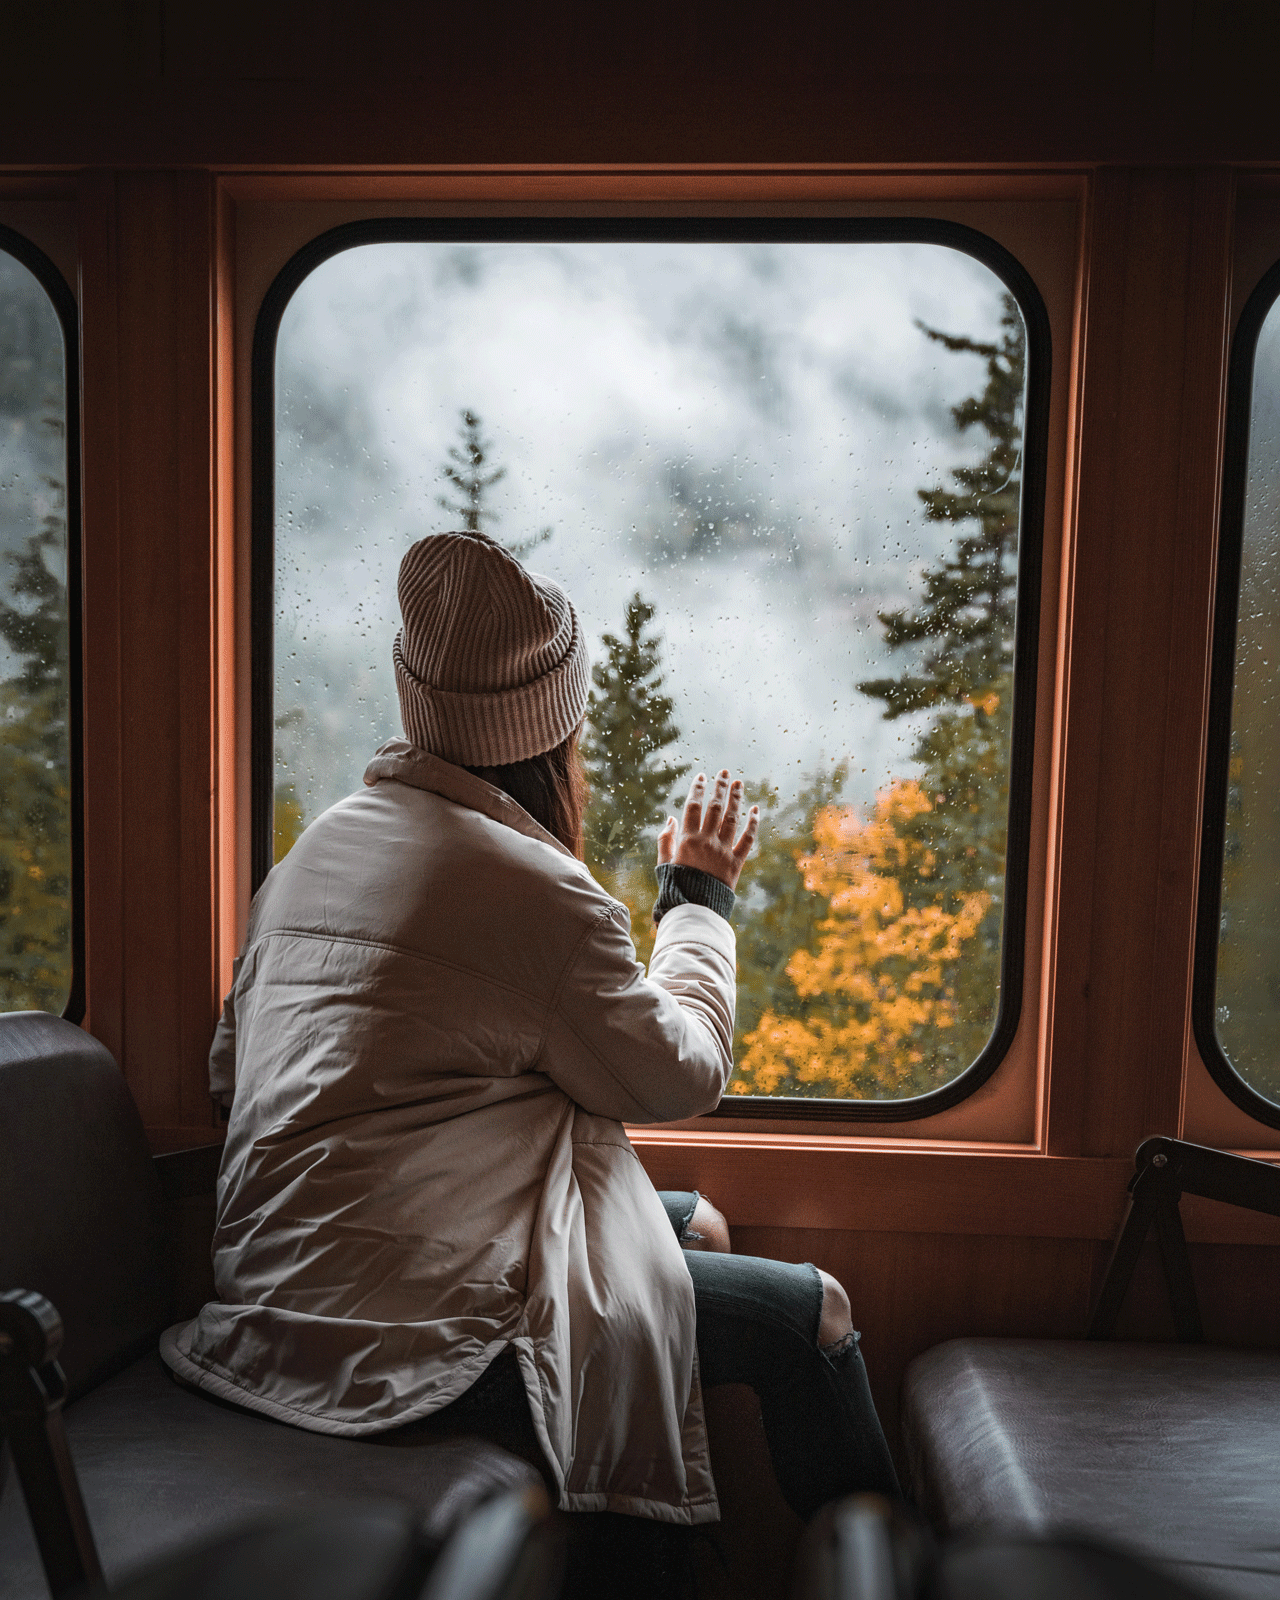 A person wearing a beanie and a jacket sits on a train, looking out of the window at a foggy, forested landscape with autumn foliage. They have their hand resting on the window, with raindrops visible on the glass.